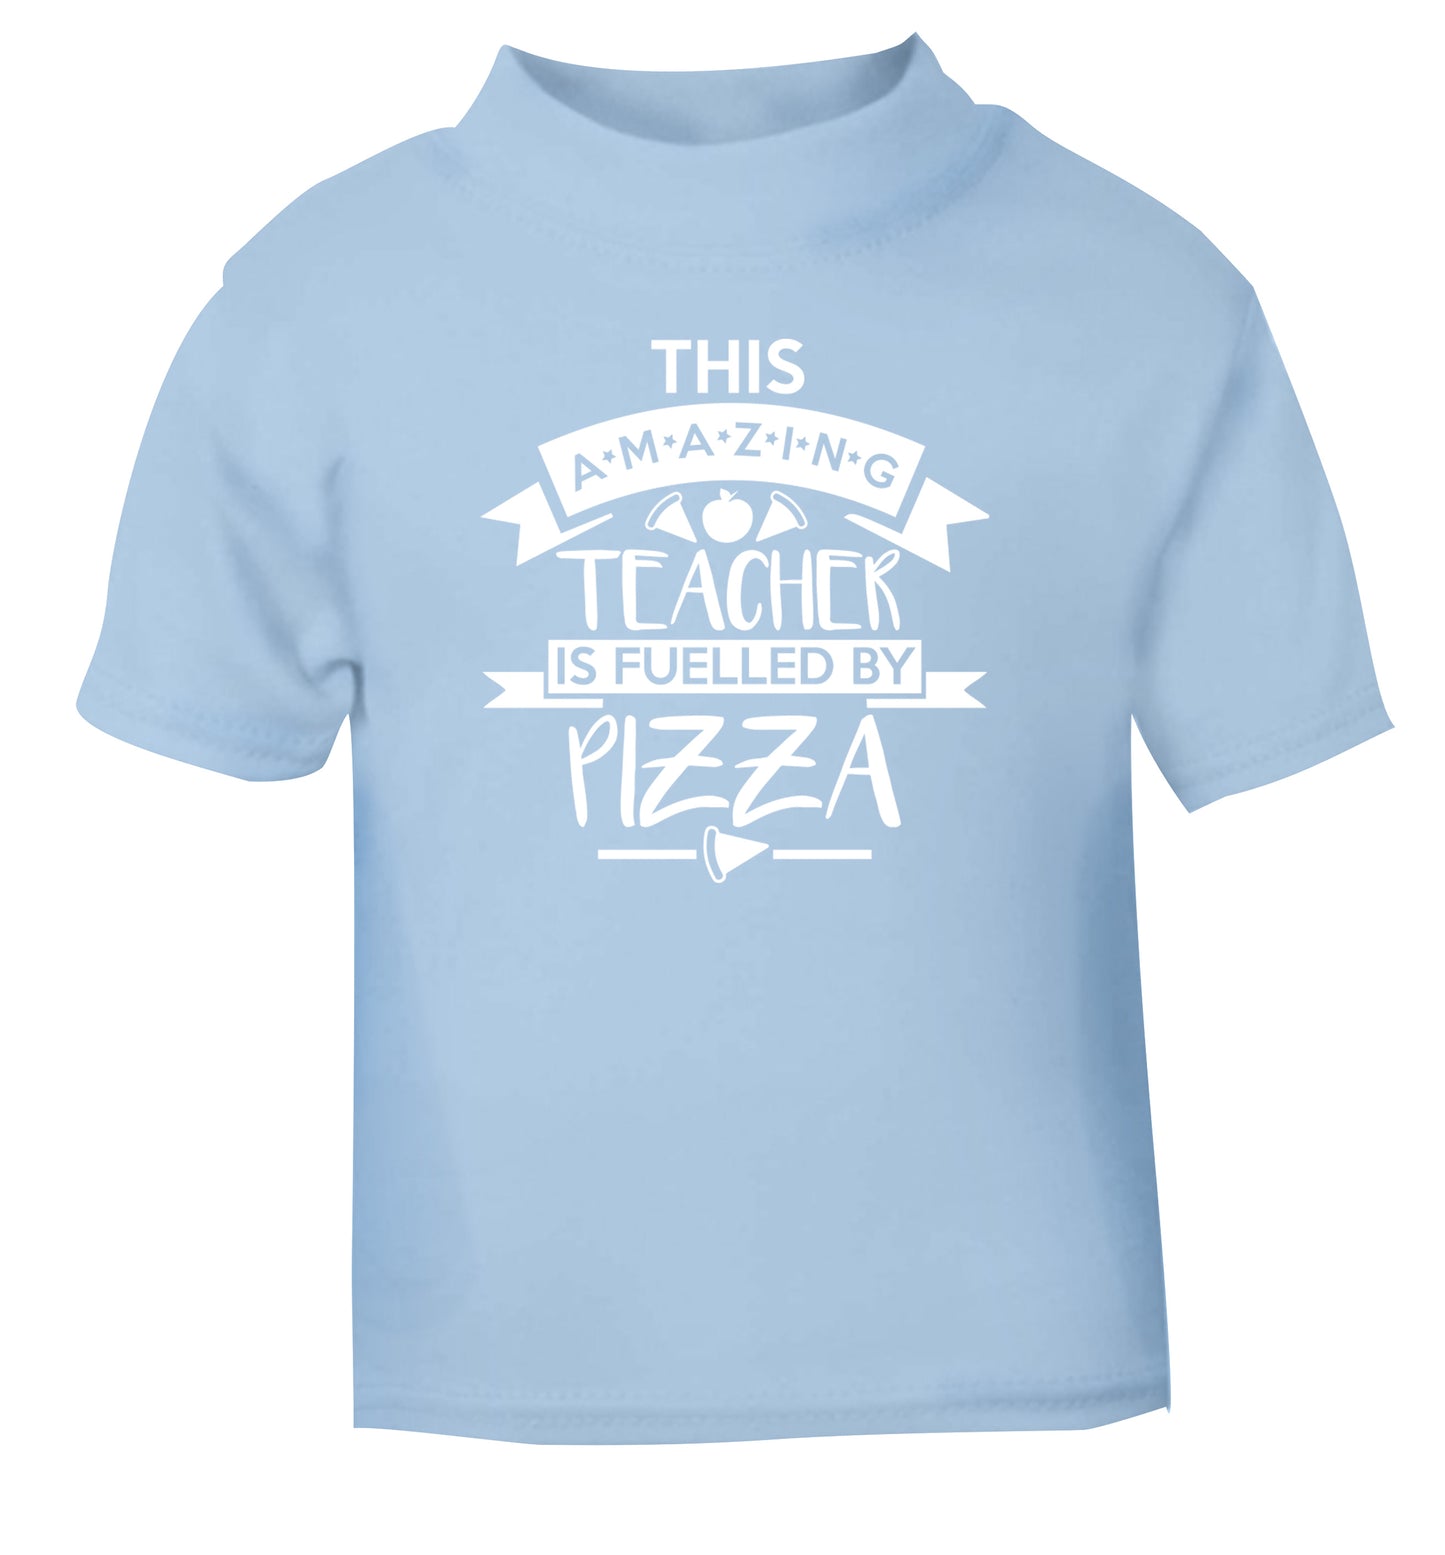 This amazing teacher is fuelled by pizza light blue Baby Toddler Tshirt 2 Years